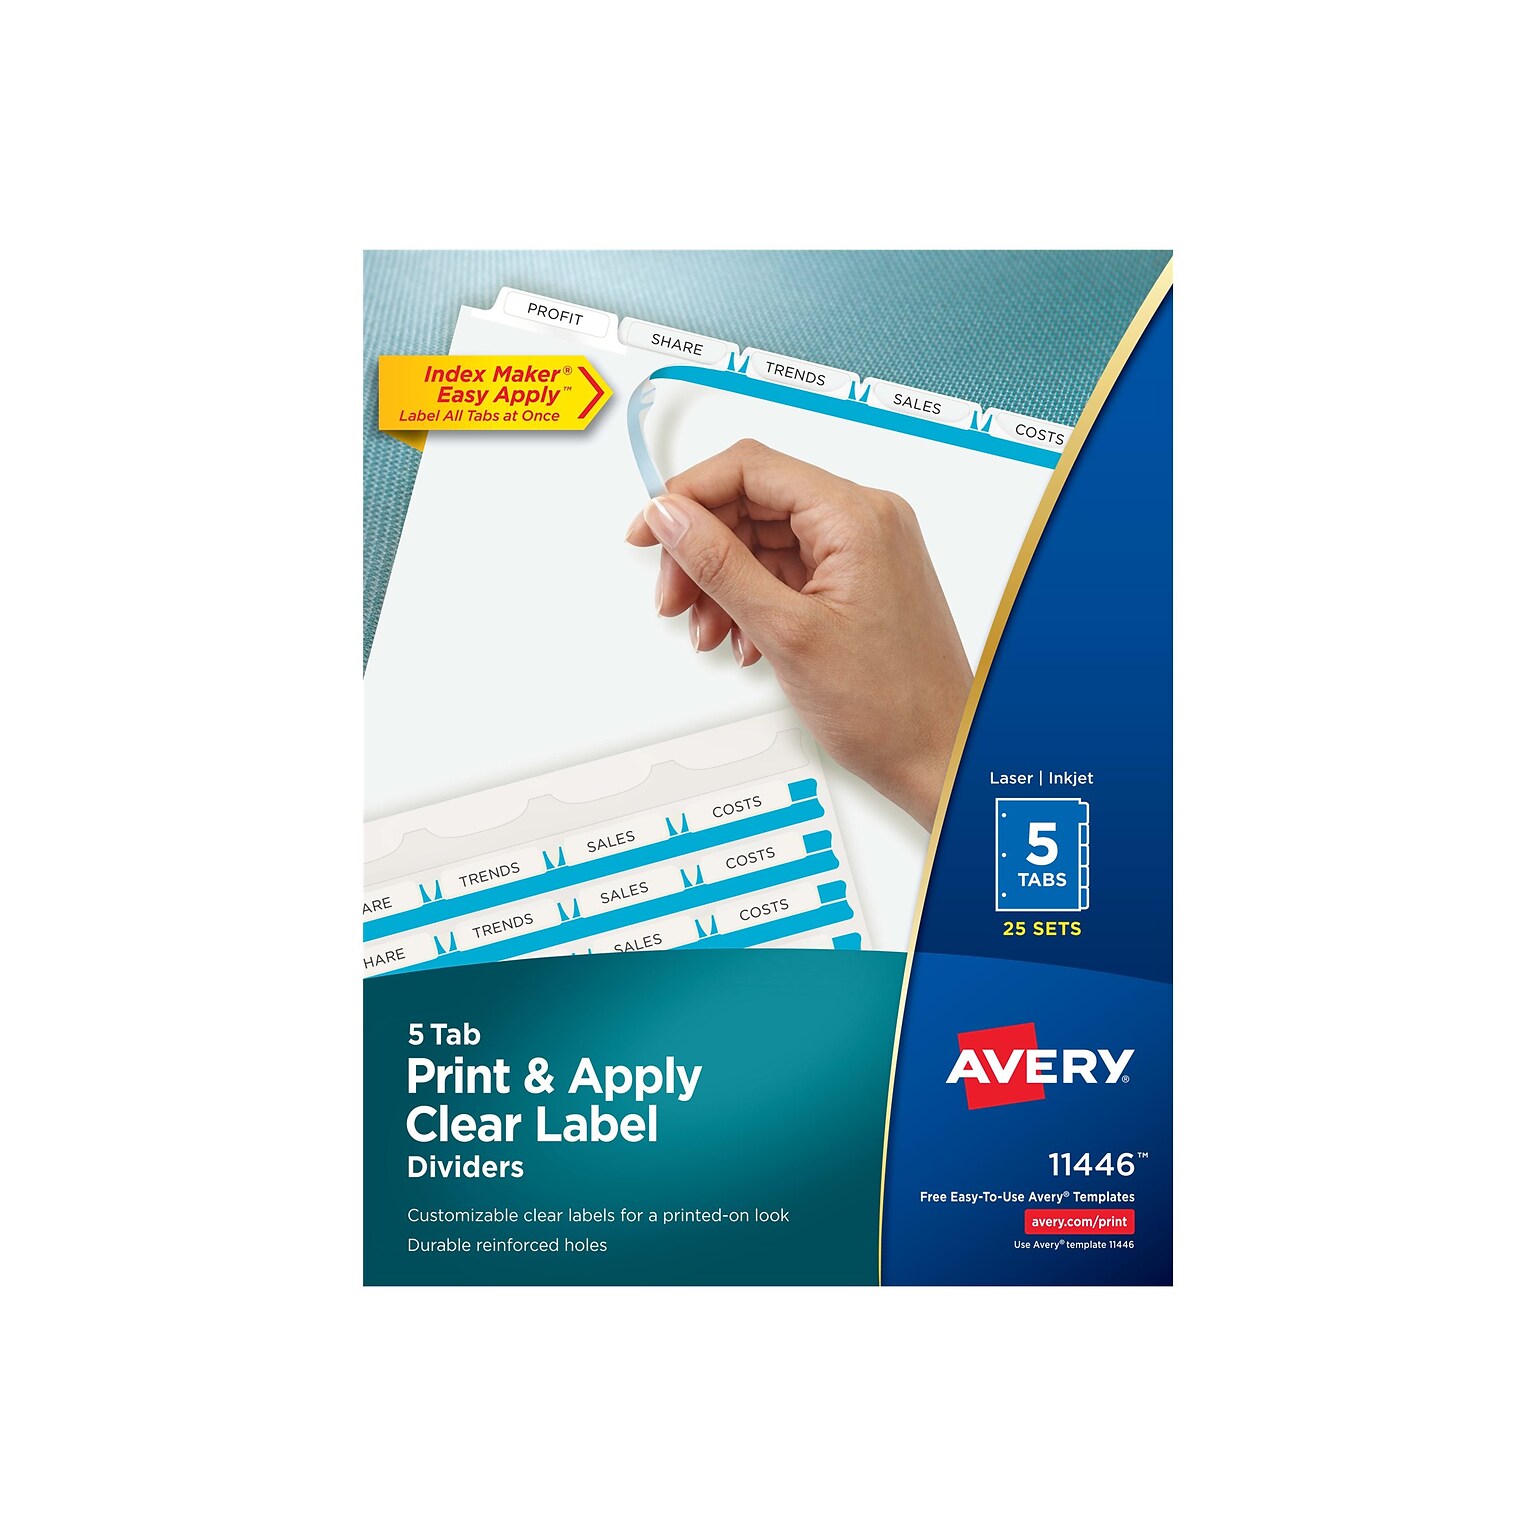 Avery Index Maker Paper Dividers with Print & Apply Label Sheets, 5 Tabs, White, 25 Sets/Pack (11446)